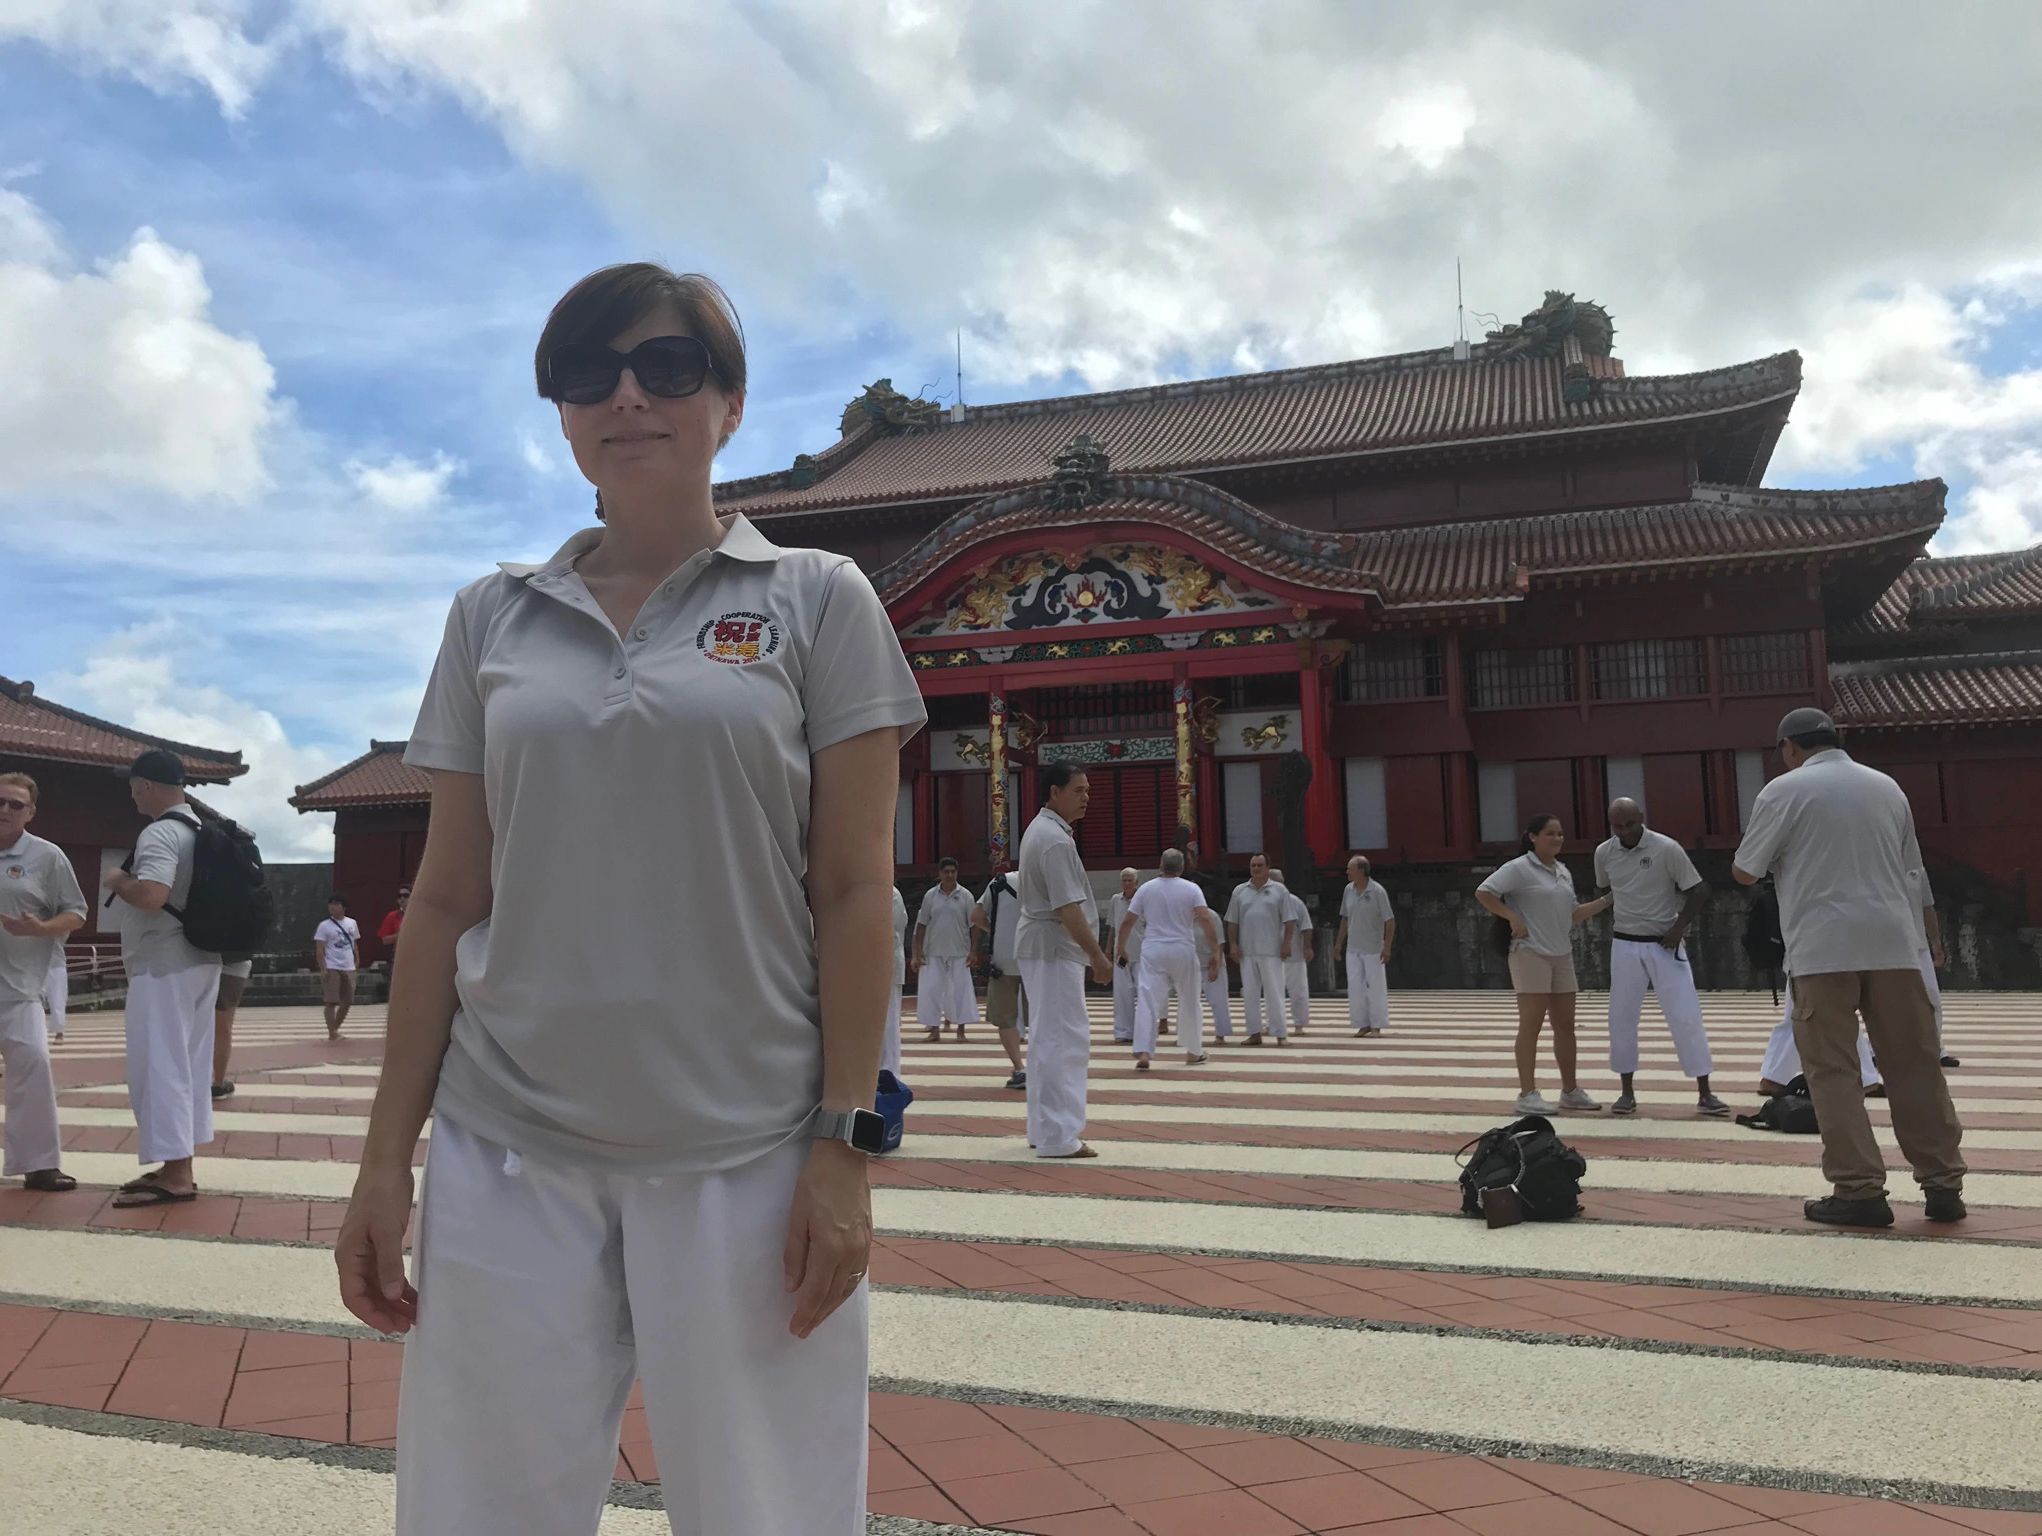 Denise, head instructor, stands in front of Shruri Castle in Okinawa Japan.